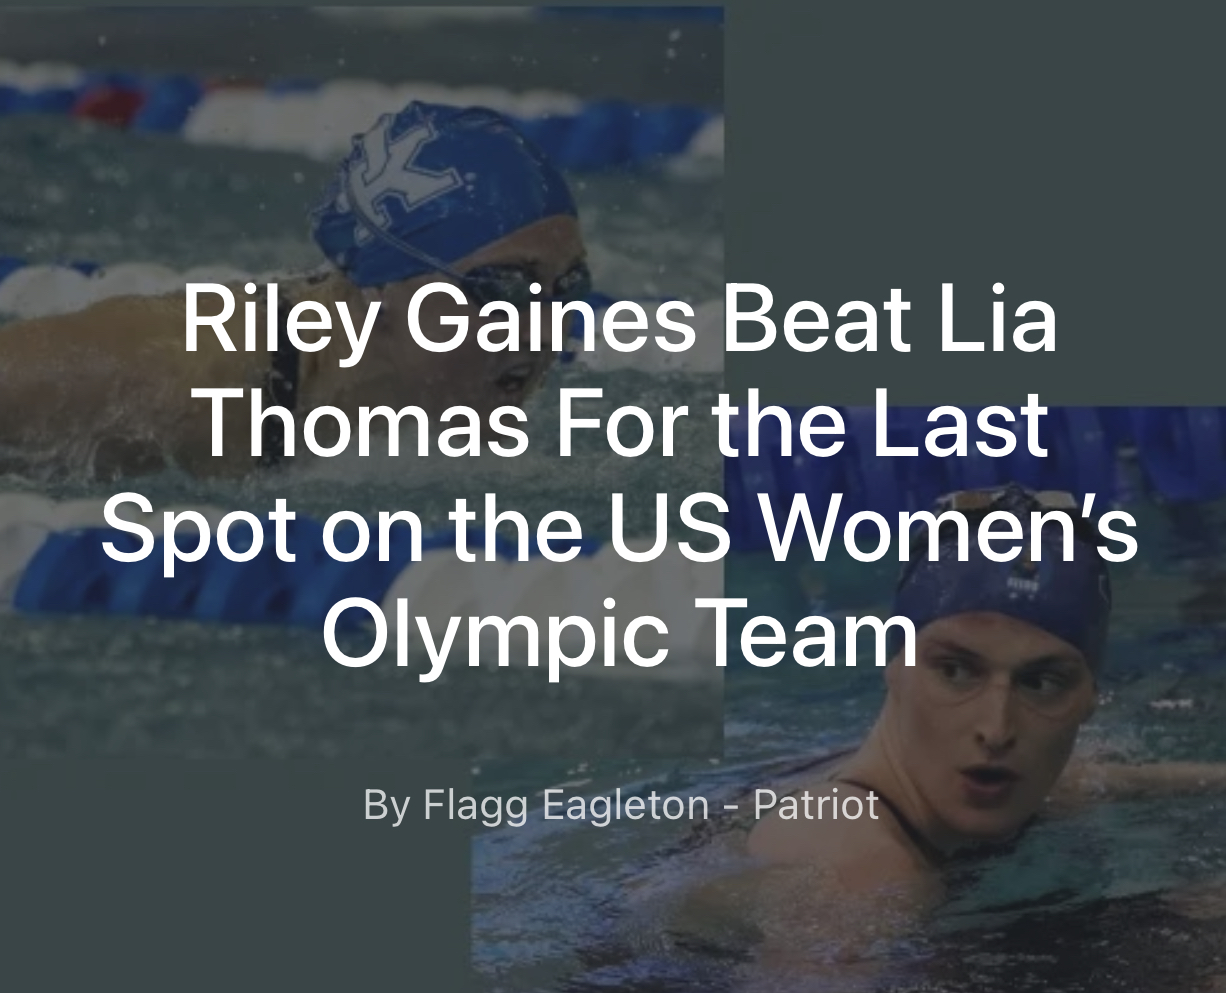 Riley Gaines Beat Lia Thomas For the Last Spot on the US Women’s